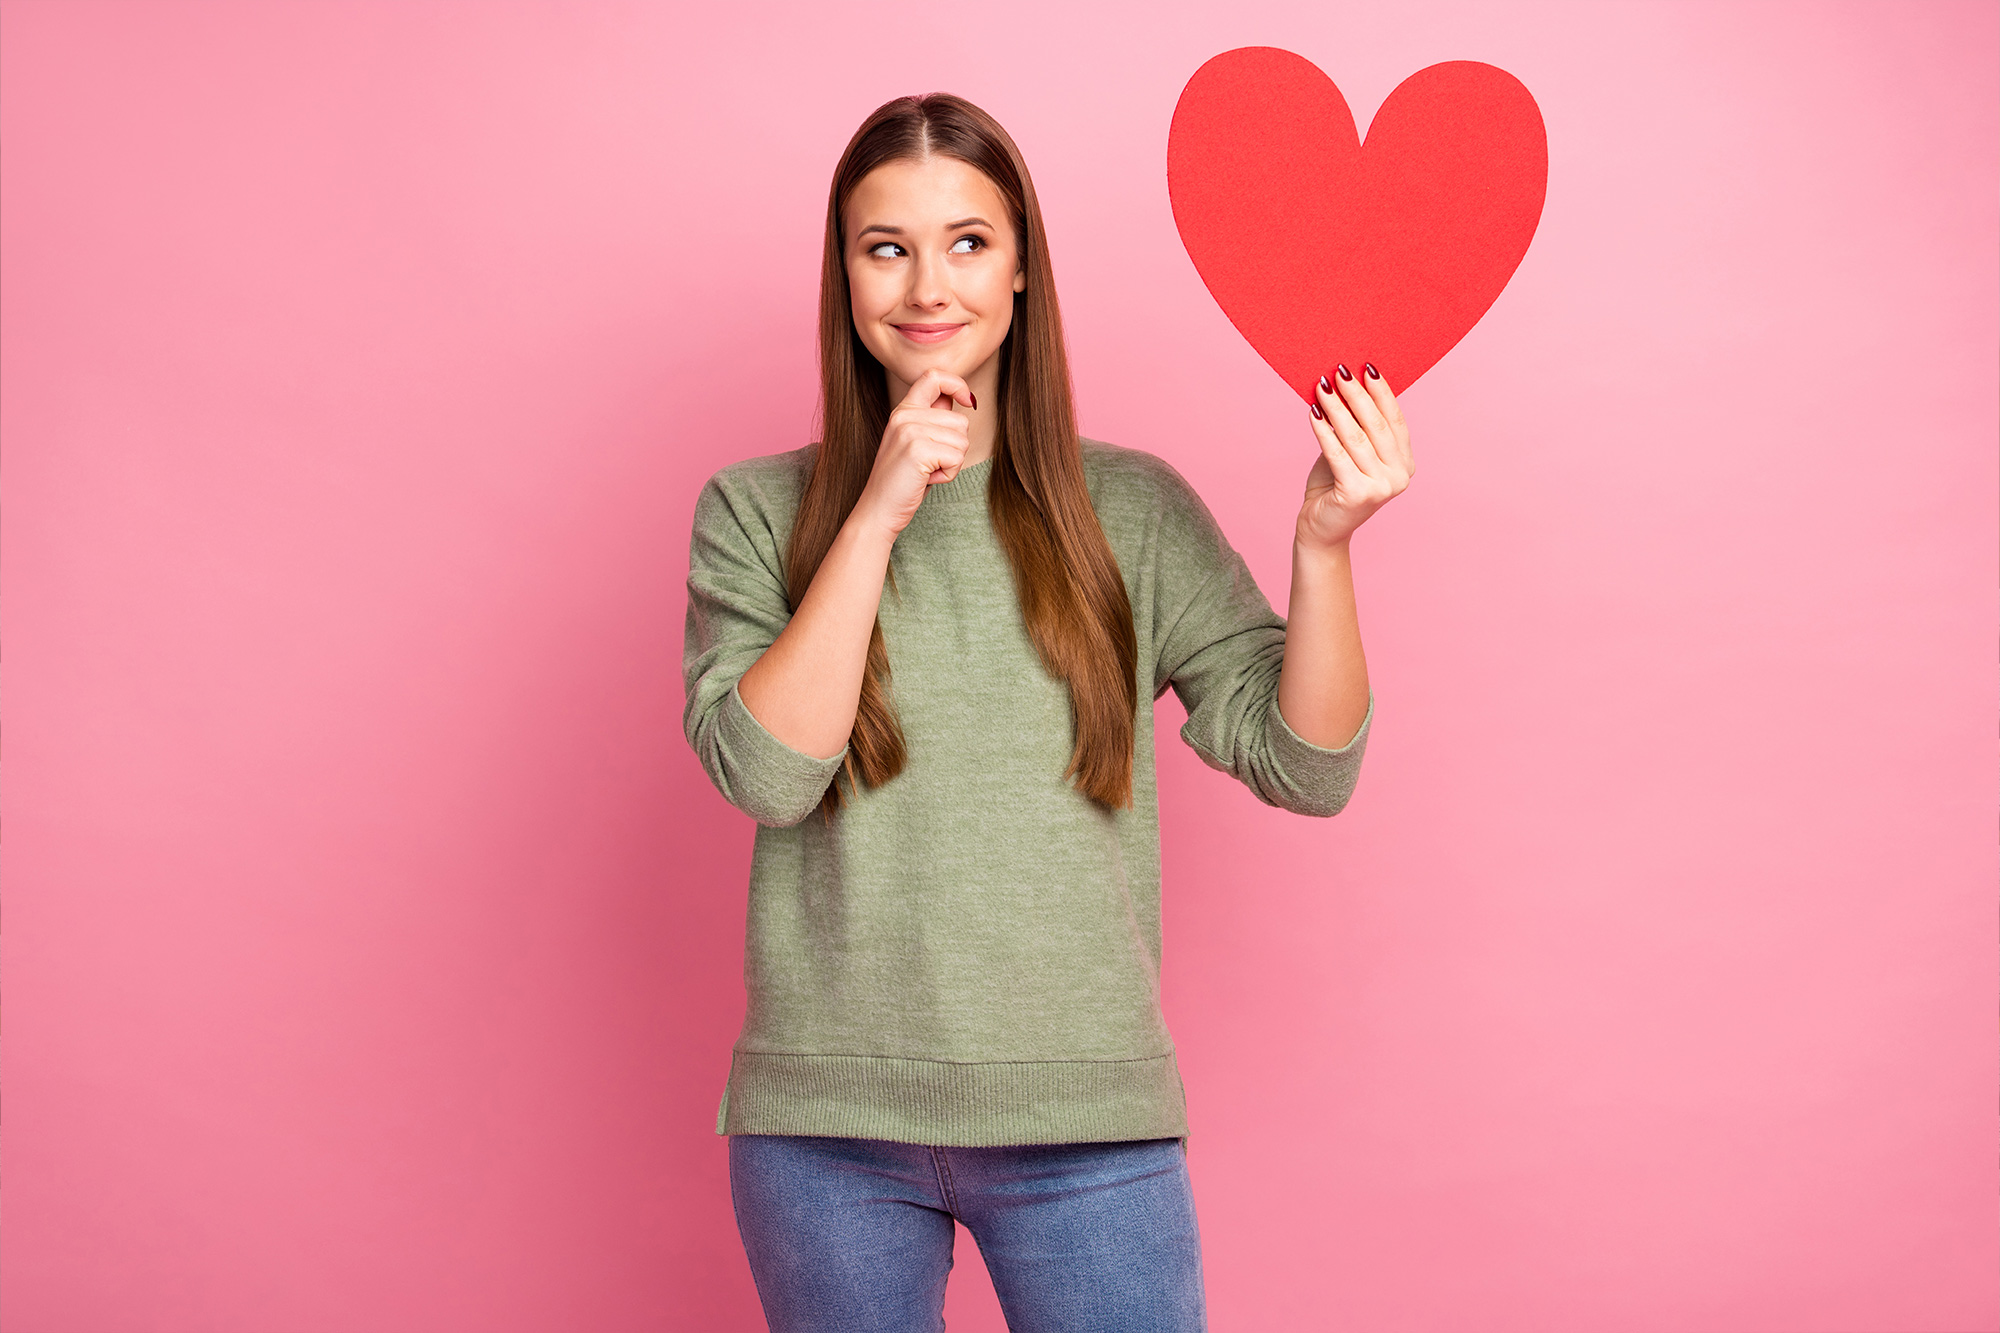 Brunette woman in green sweater and blue jeans holding a red love heart with one hand and her chin with the other.